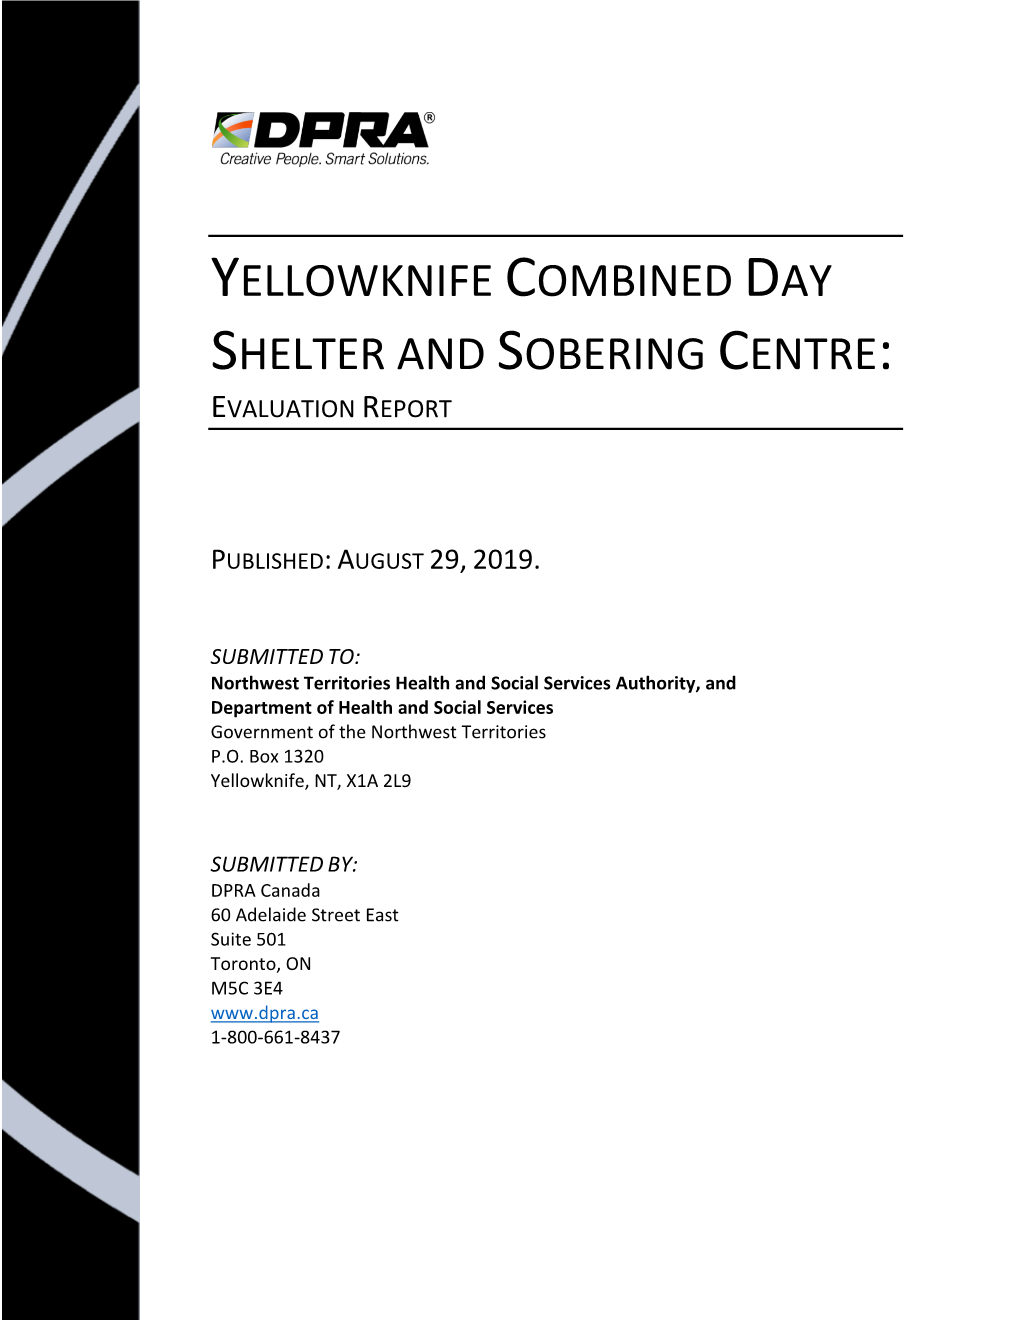 Yellowknife Combined Day Shelter and Sobering Centre: Evaluation Report